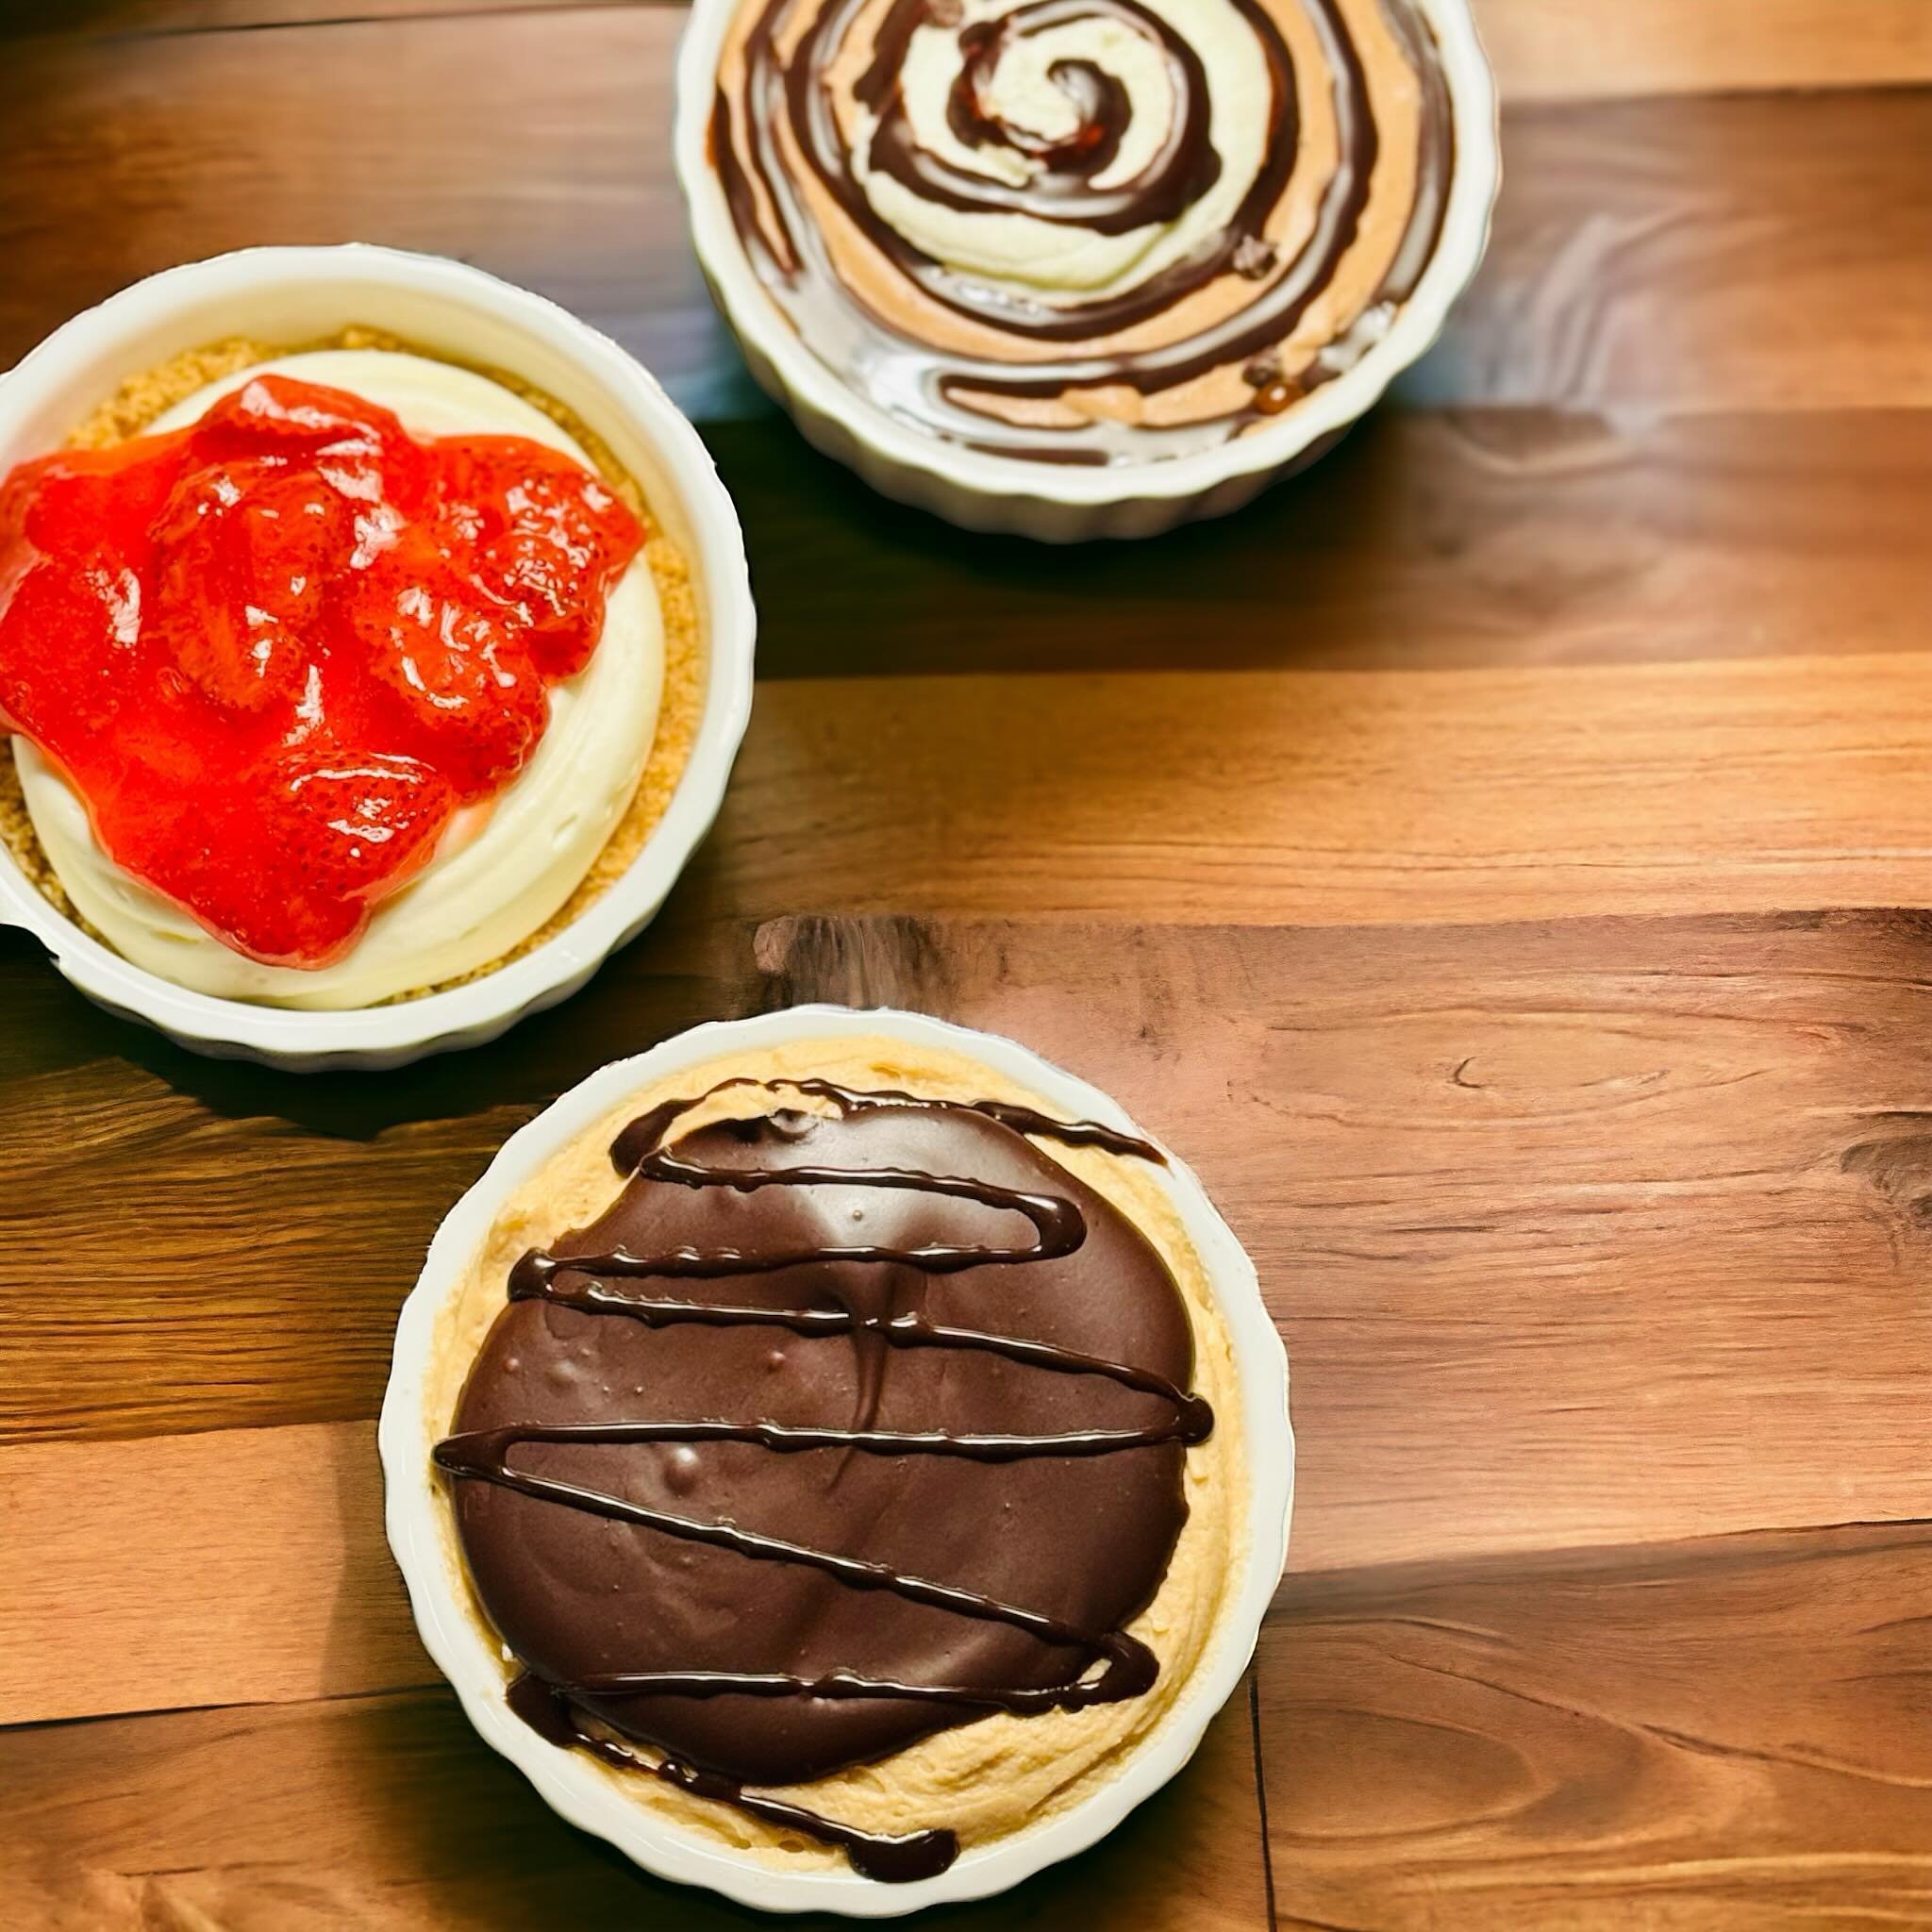 Satisfy your sweet tooth at Ovalon 🍰✨! Now, ALL our desserts come in charming individualized dishes&mdash;perfect for dining in or taking away. 🍽️🏃&zwj;♂️

Our desserts are crafted in-house with love and care. 🏡❤️ Choose from three delightful fru